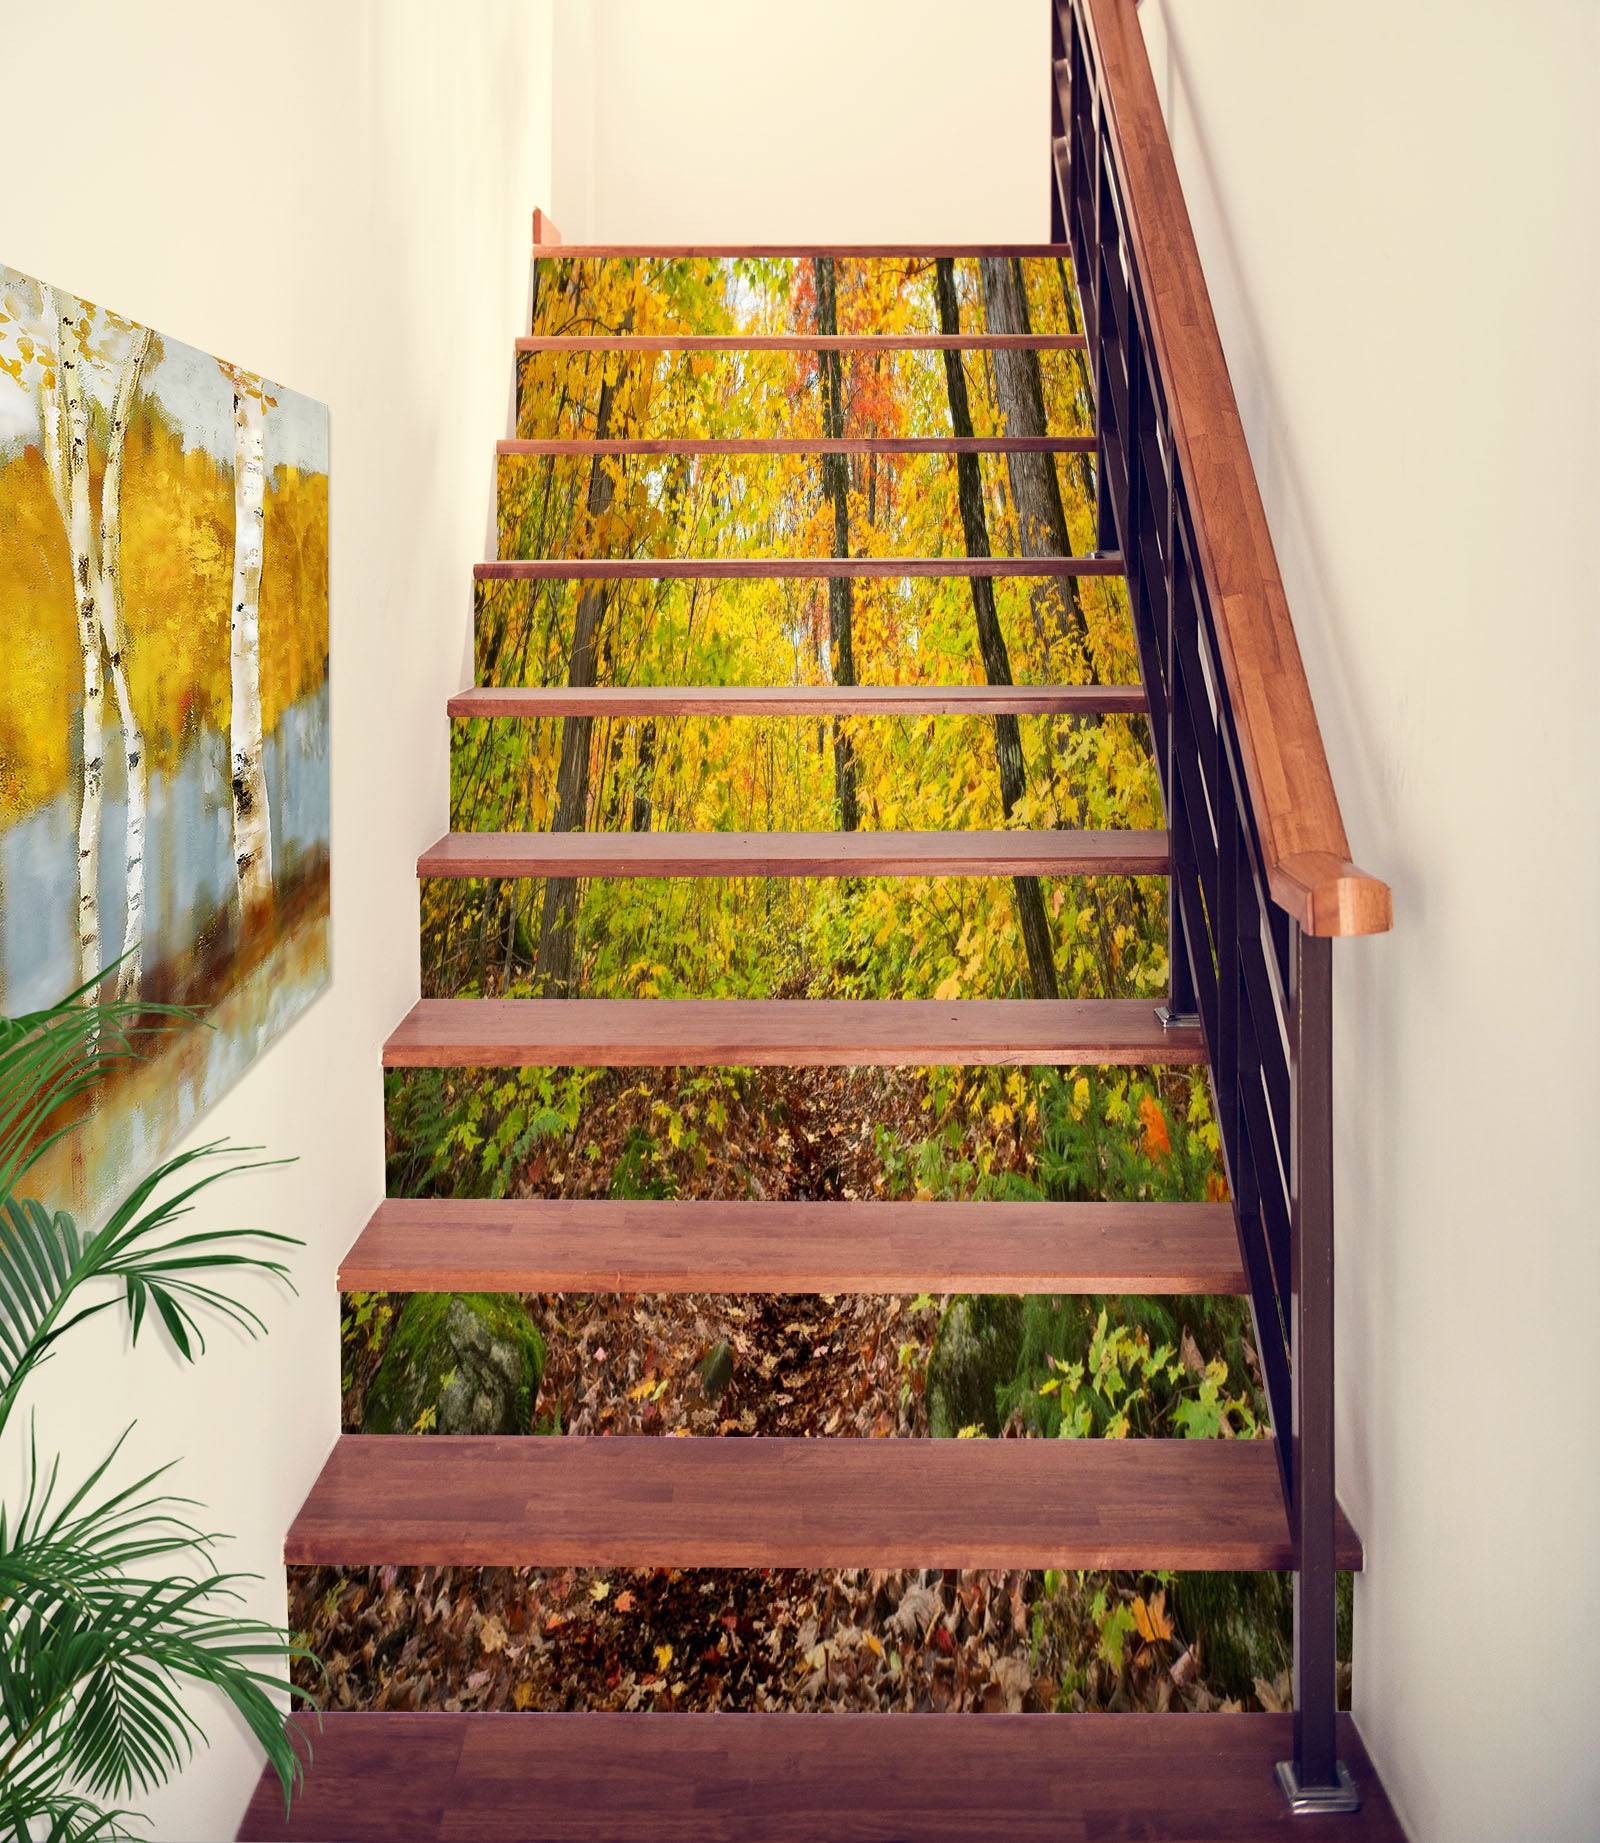 3D Forest 9485 Kathy Barefield Stair Risers